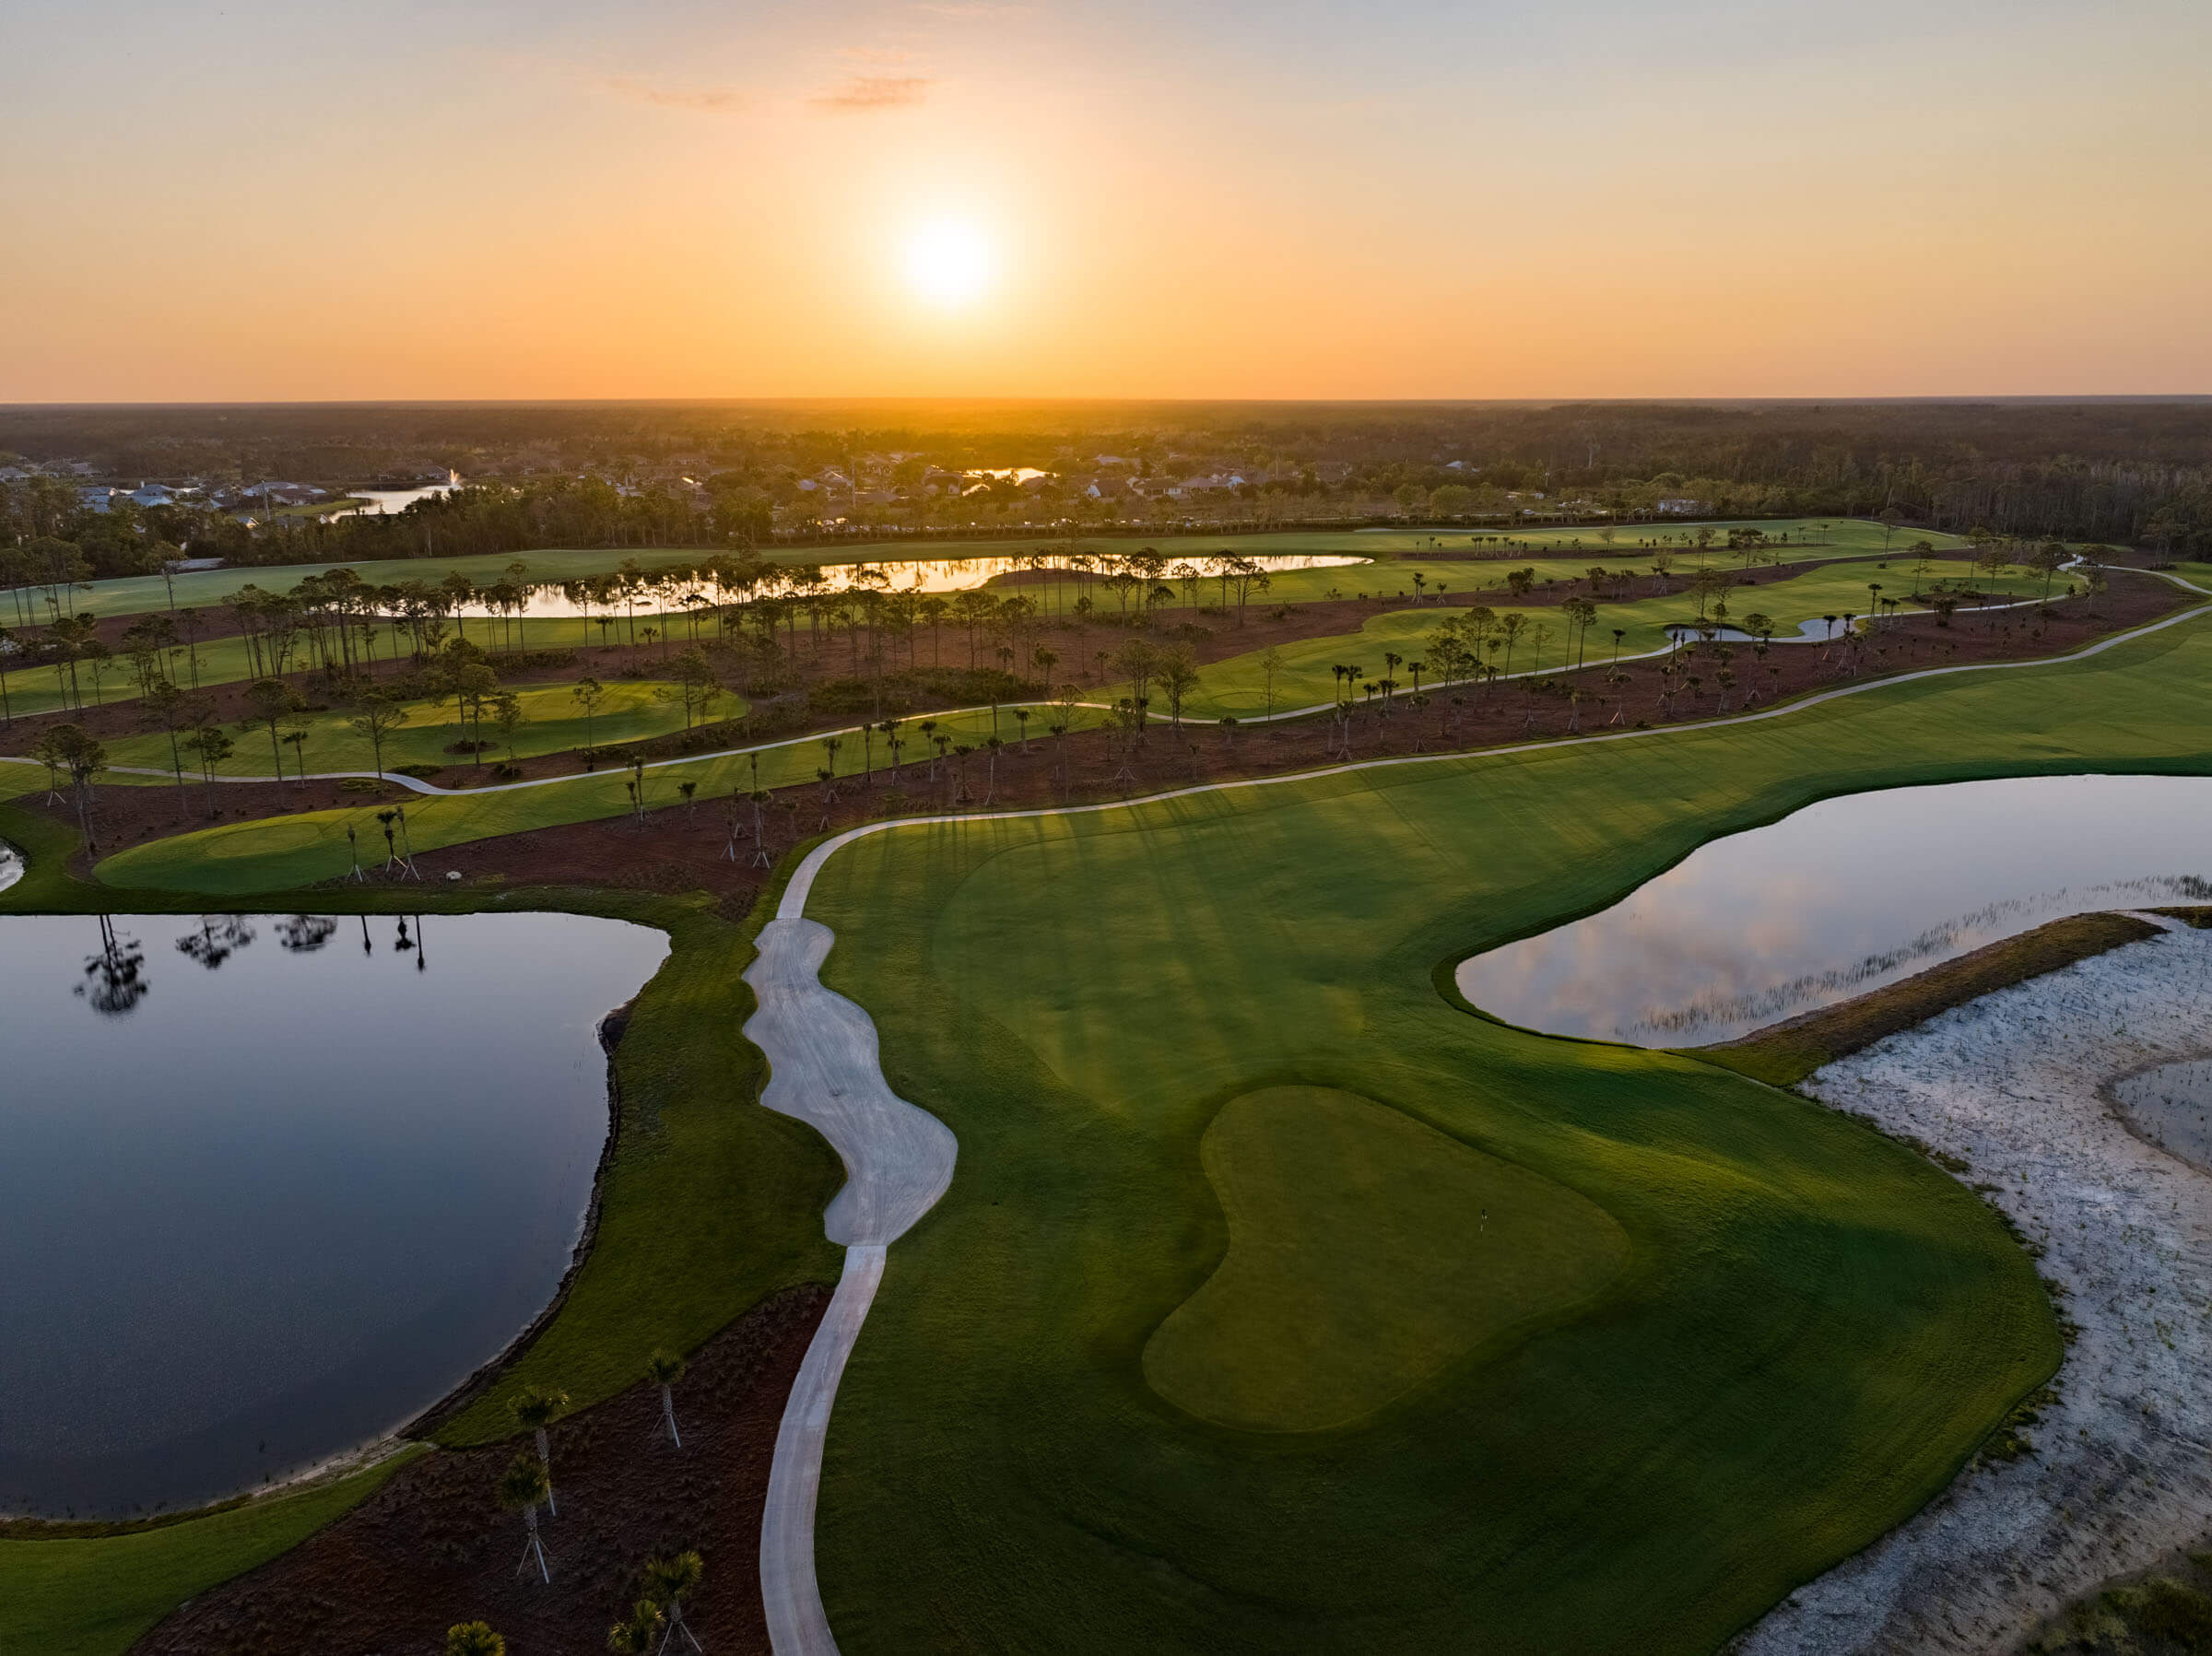 Aerial view of a golf course at sunset, featuring lush greens, water hazards, and a pathway, with a scenic backdrop of a forest and river.